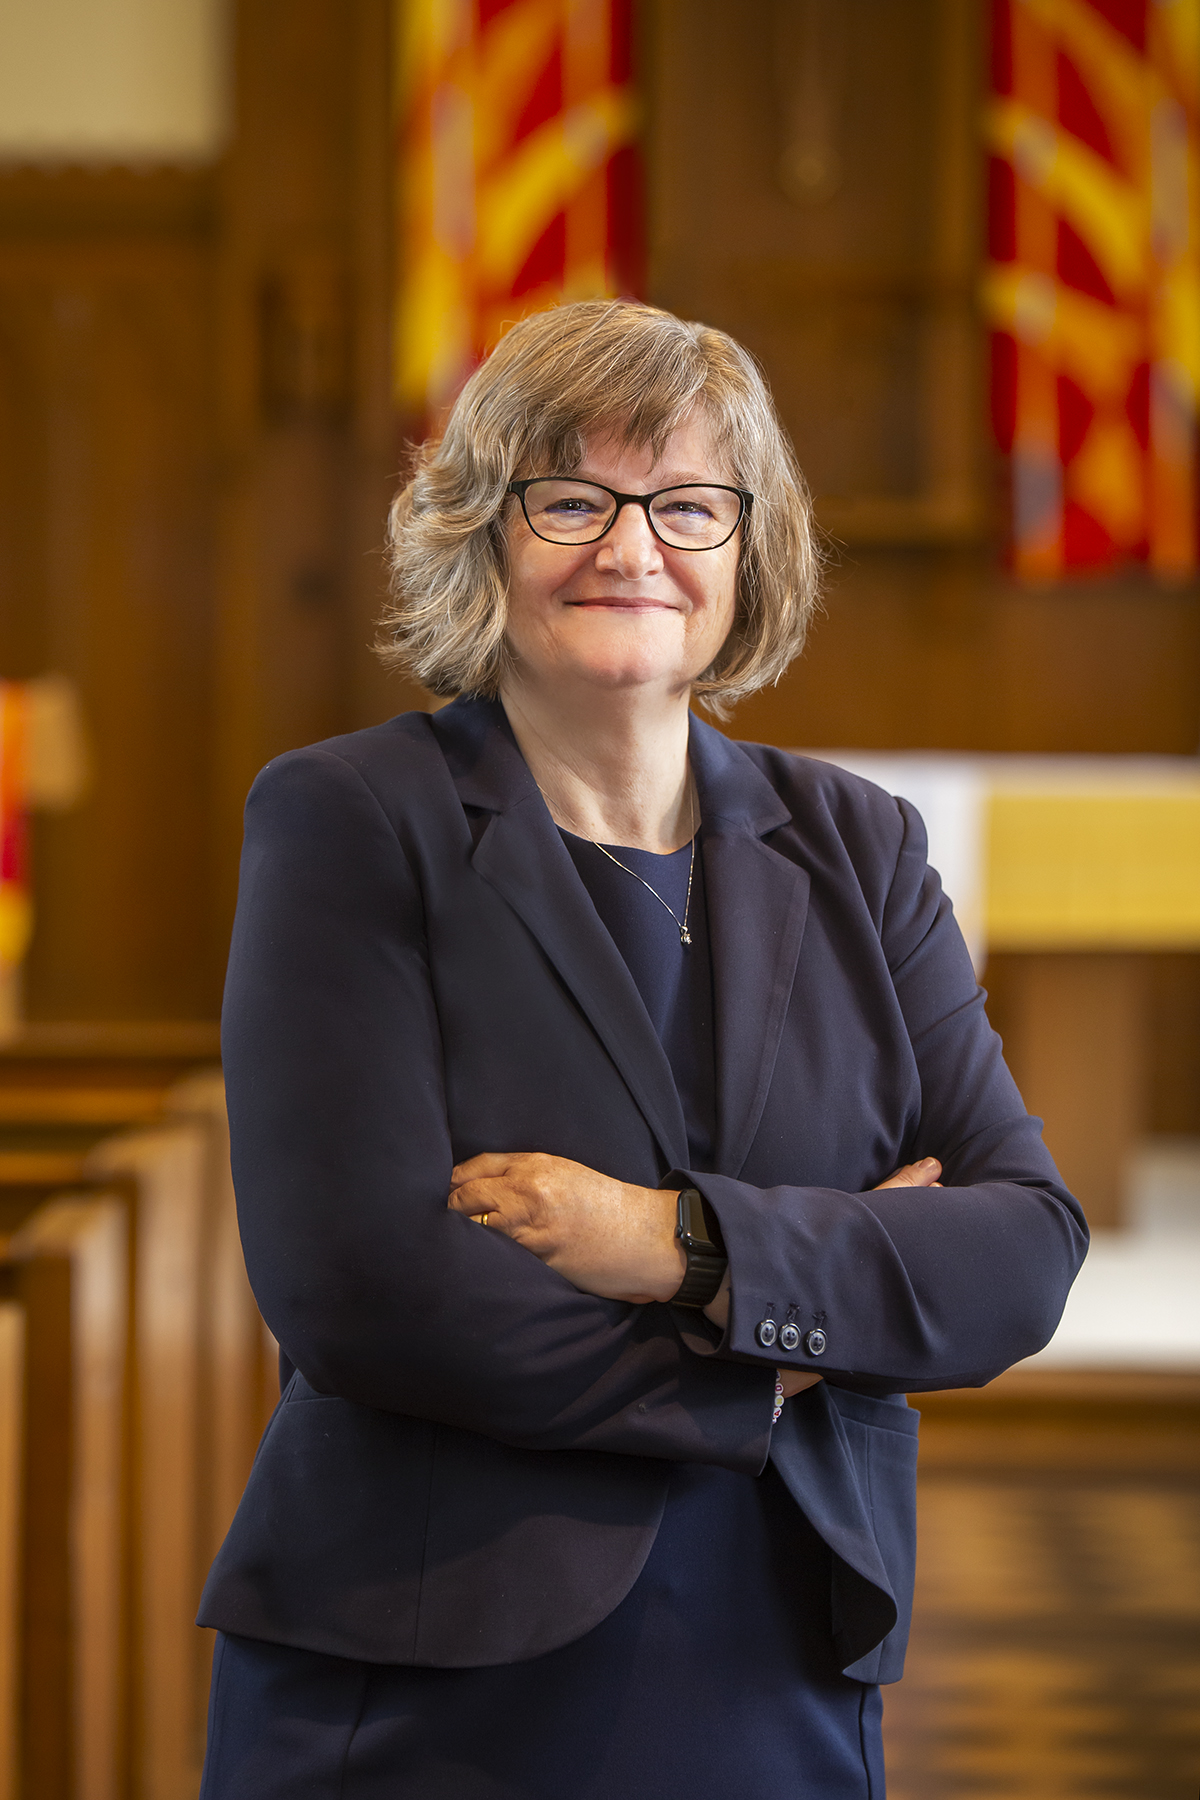 Isabelle Cherney named Mount Mary’s 13th president